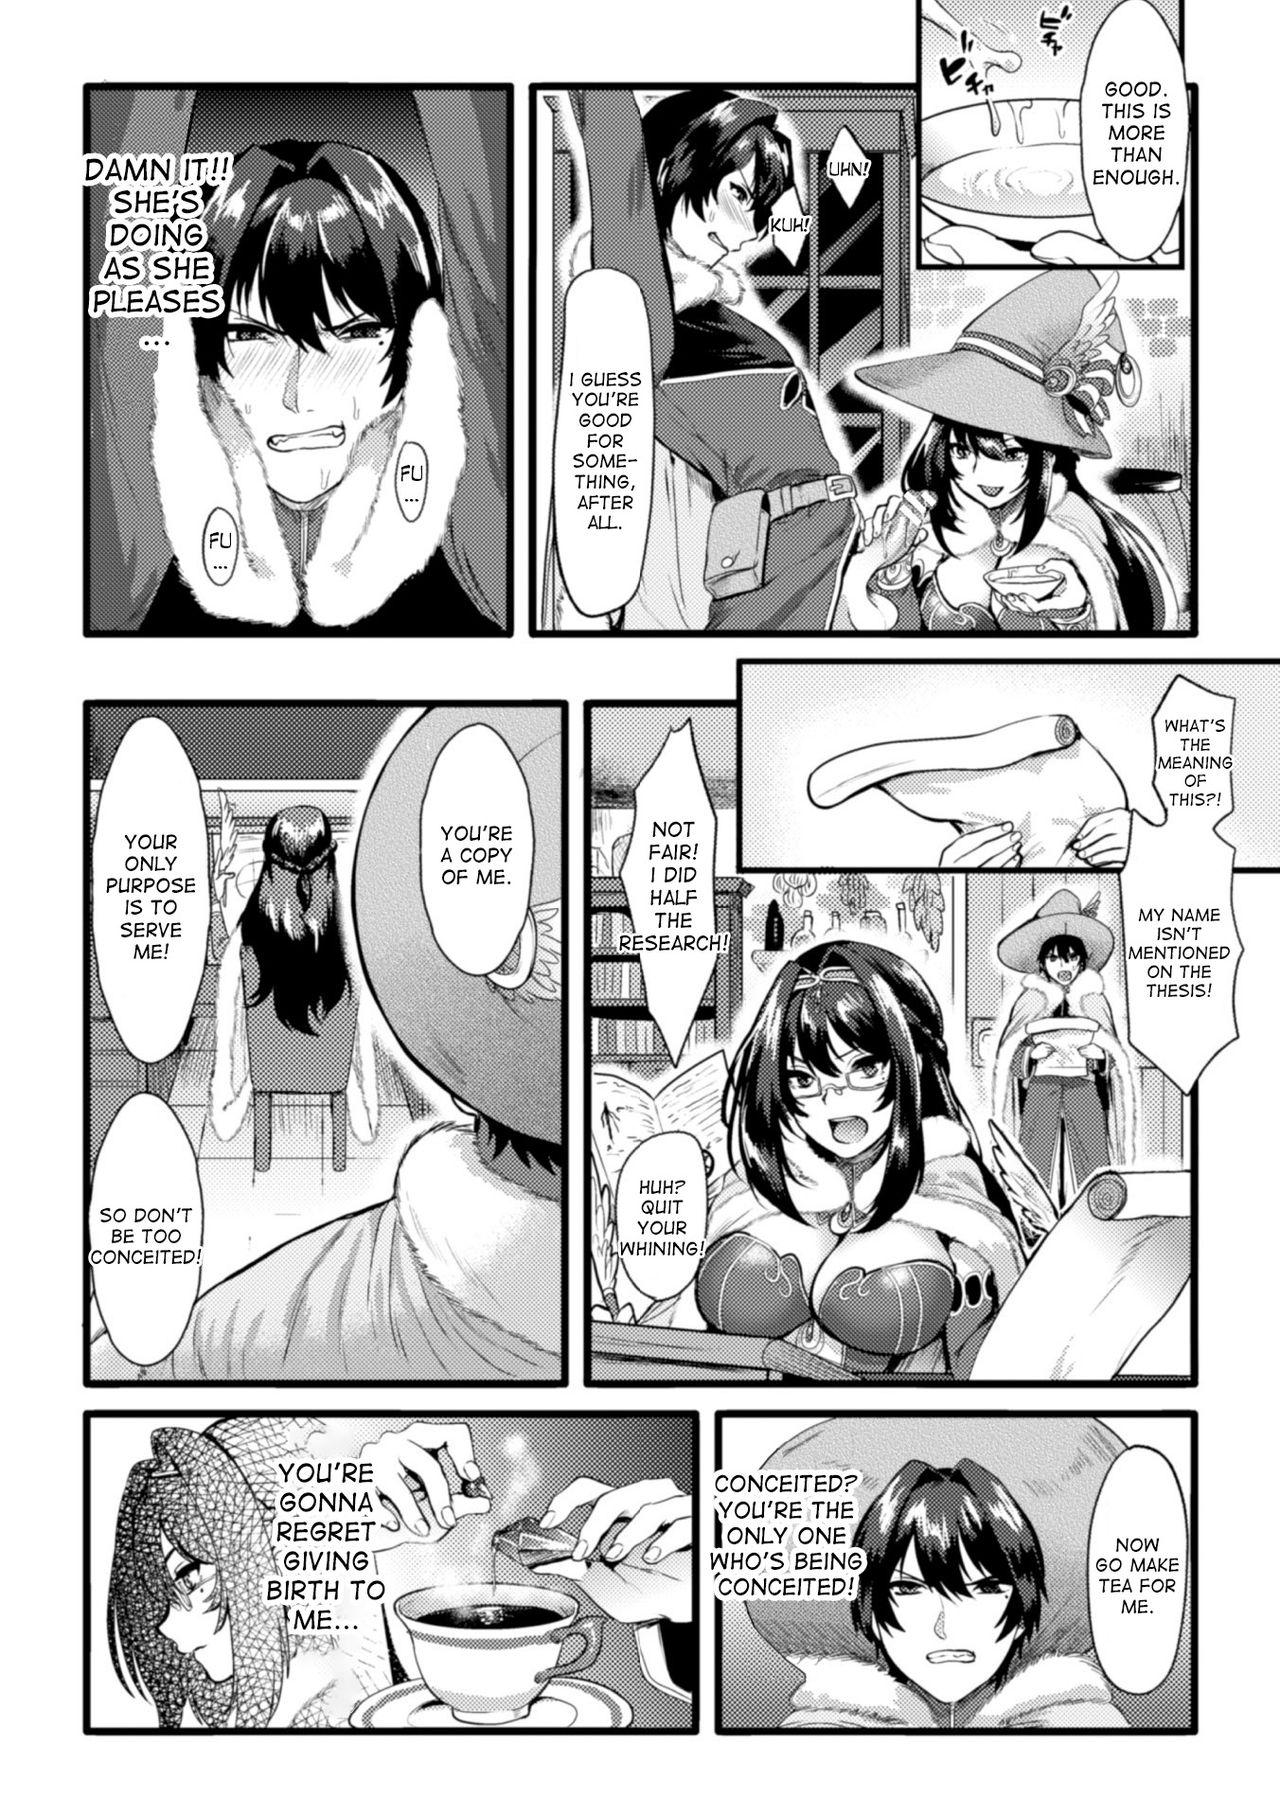 Real Witch Avatar's revenge Gilf - Page 3